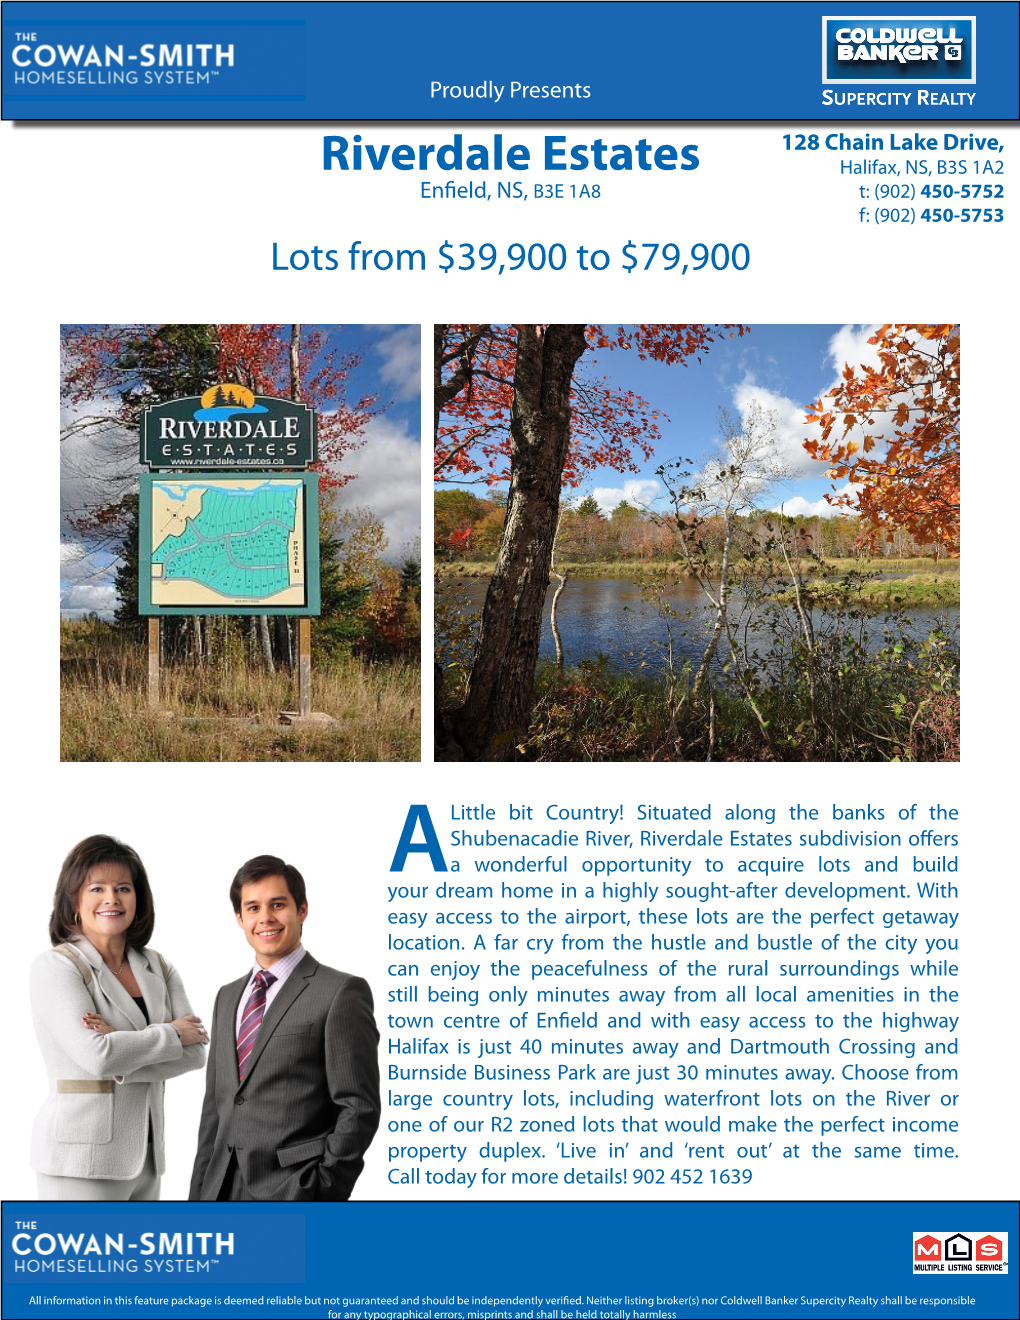 Riverdale Estates Halifax, NS, B3S 1A2 Enfield, NS,B3E 1A8 T: (902) 450-5752 F: (902) 450-5753 Lots from $39,900 to $79,900